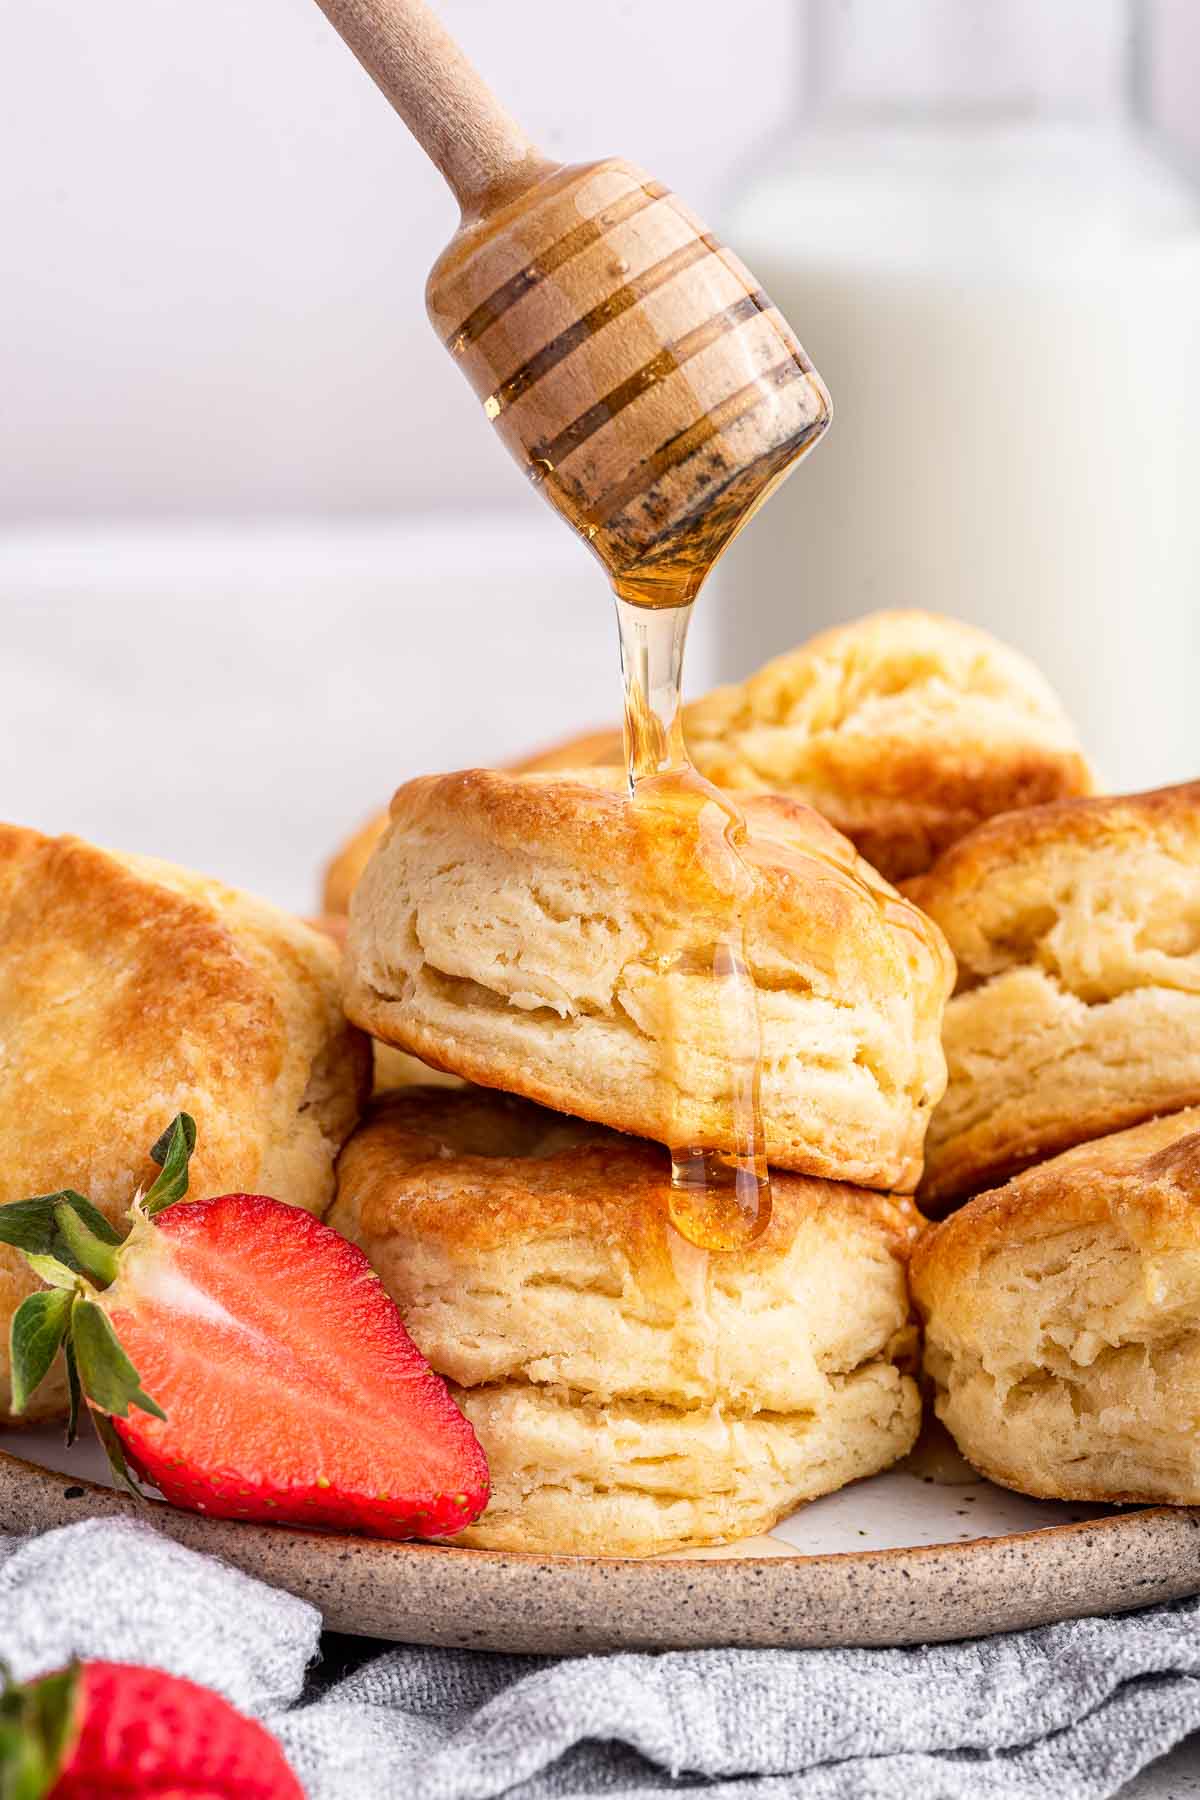 Honey dipper drizzling honey on stack of freshly baked buttermilk biscuits.